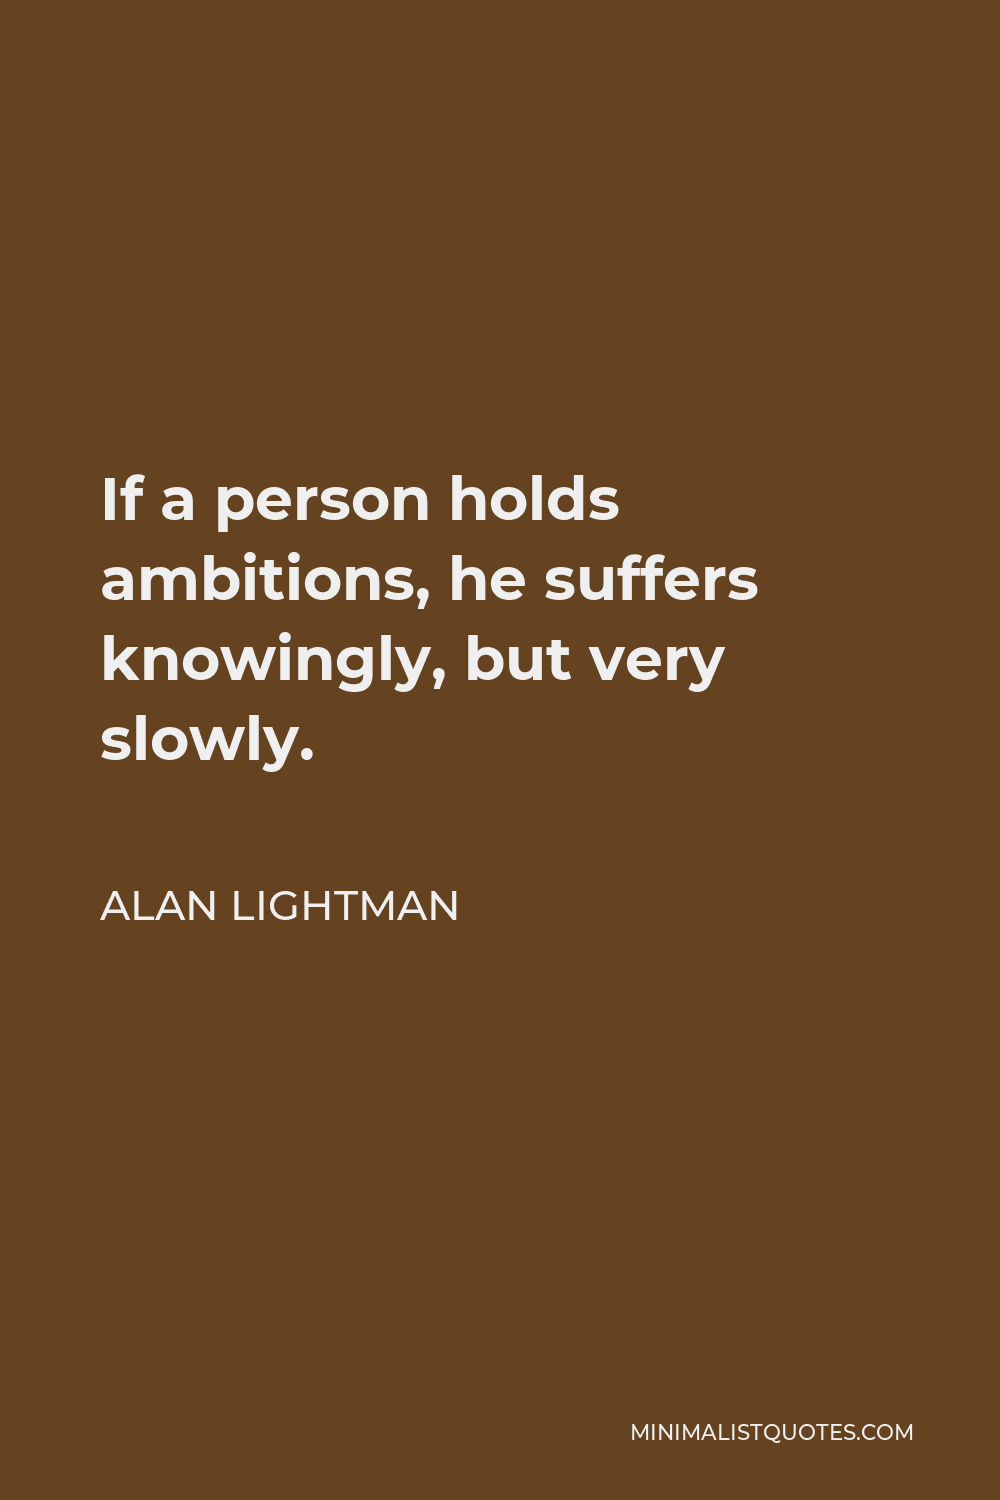 Alan Lightman Quote - If a person holds ambitions, he suffers knowingly, but very slowly.